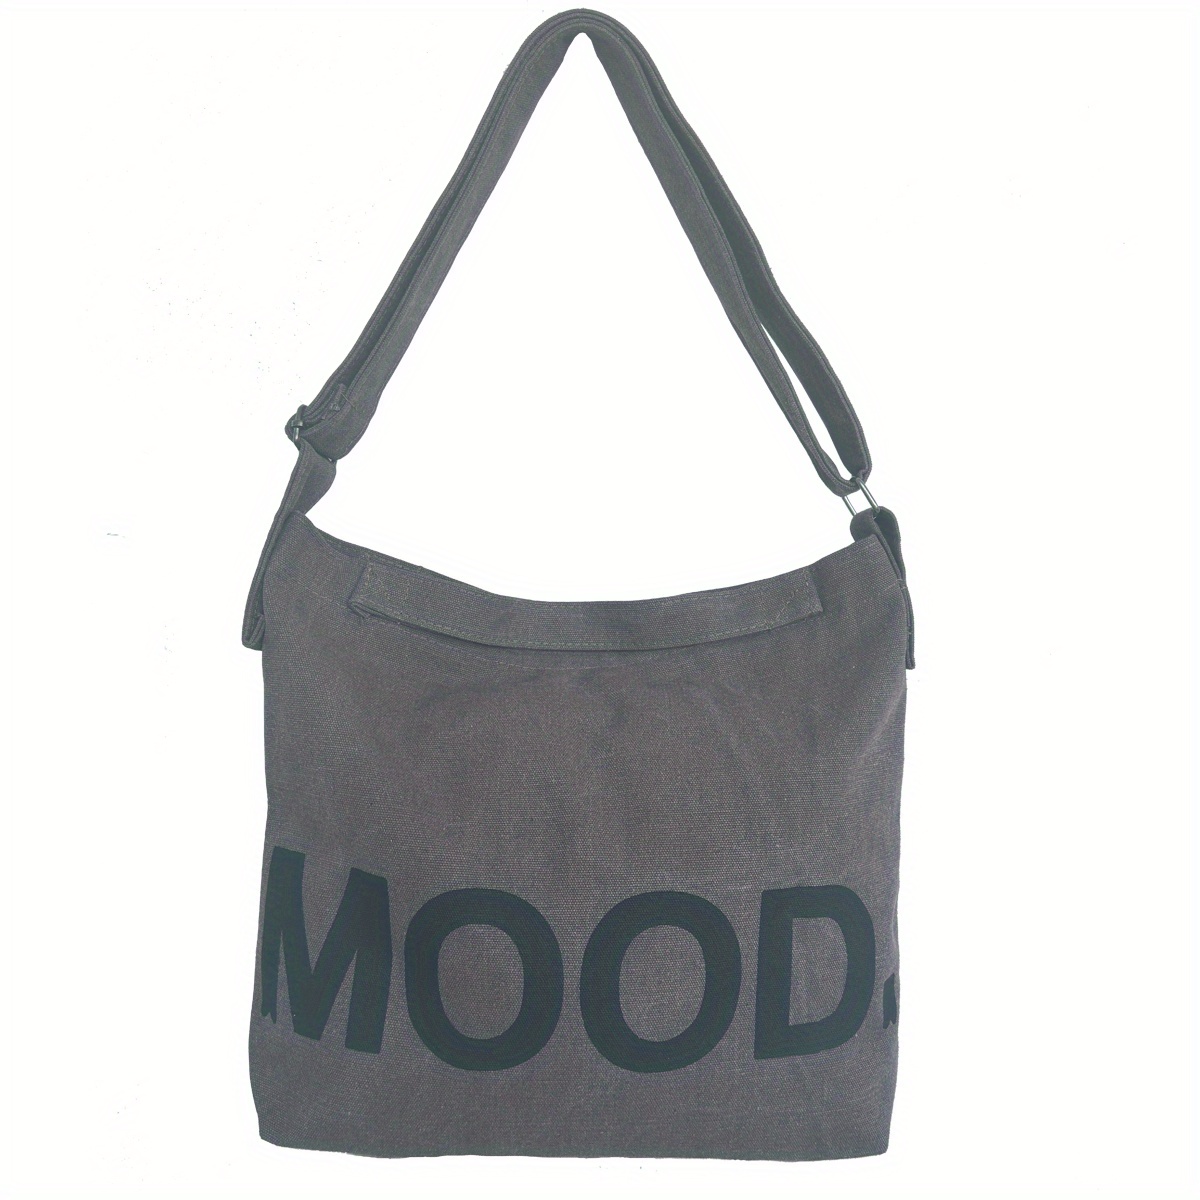 Graphic Tote Bag With Crossbody Bag